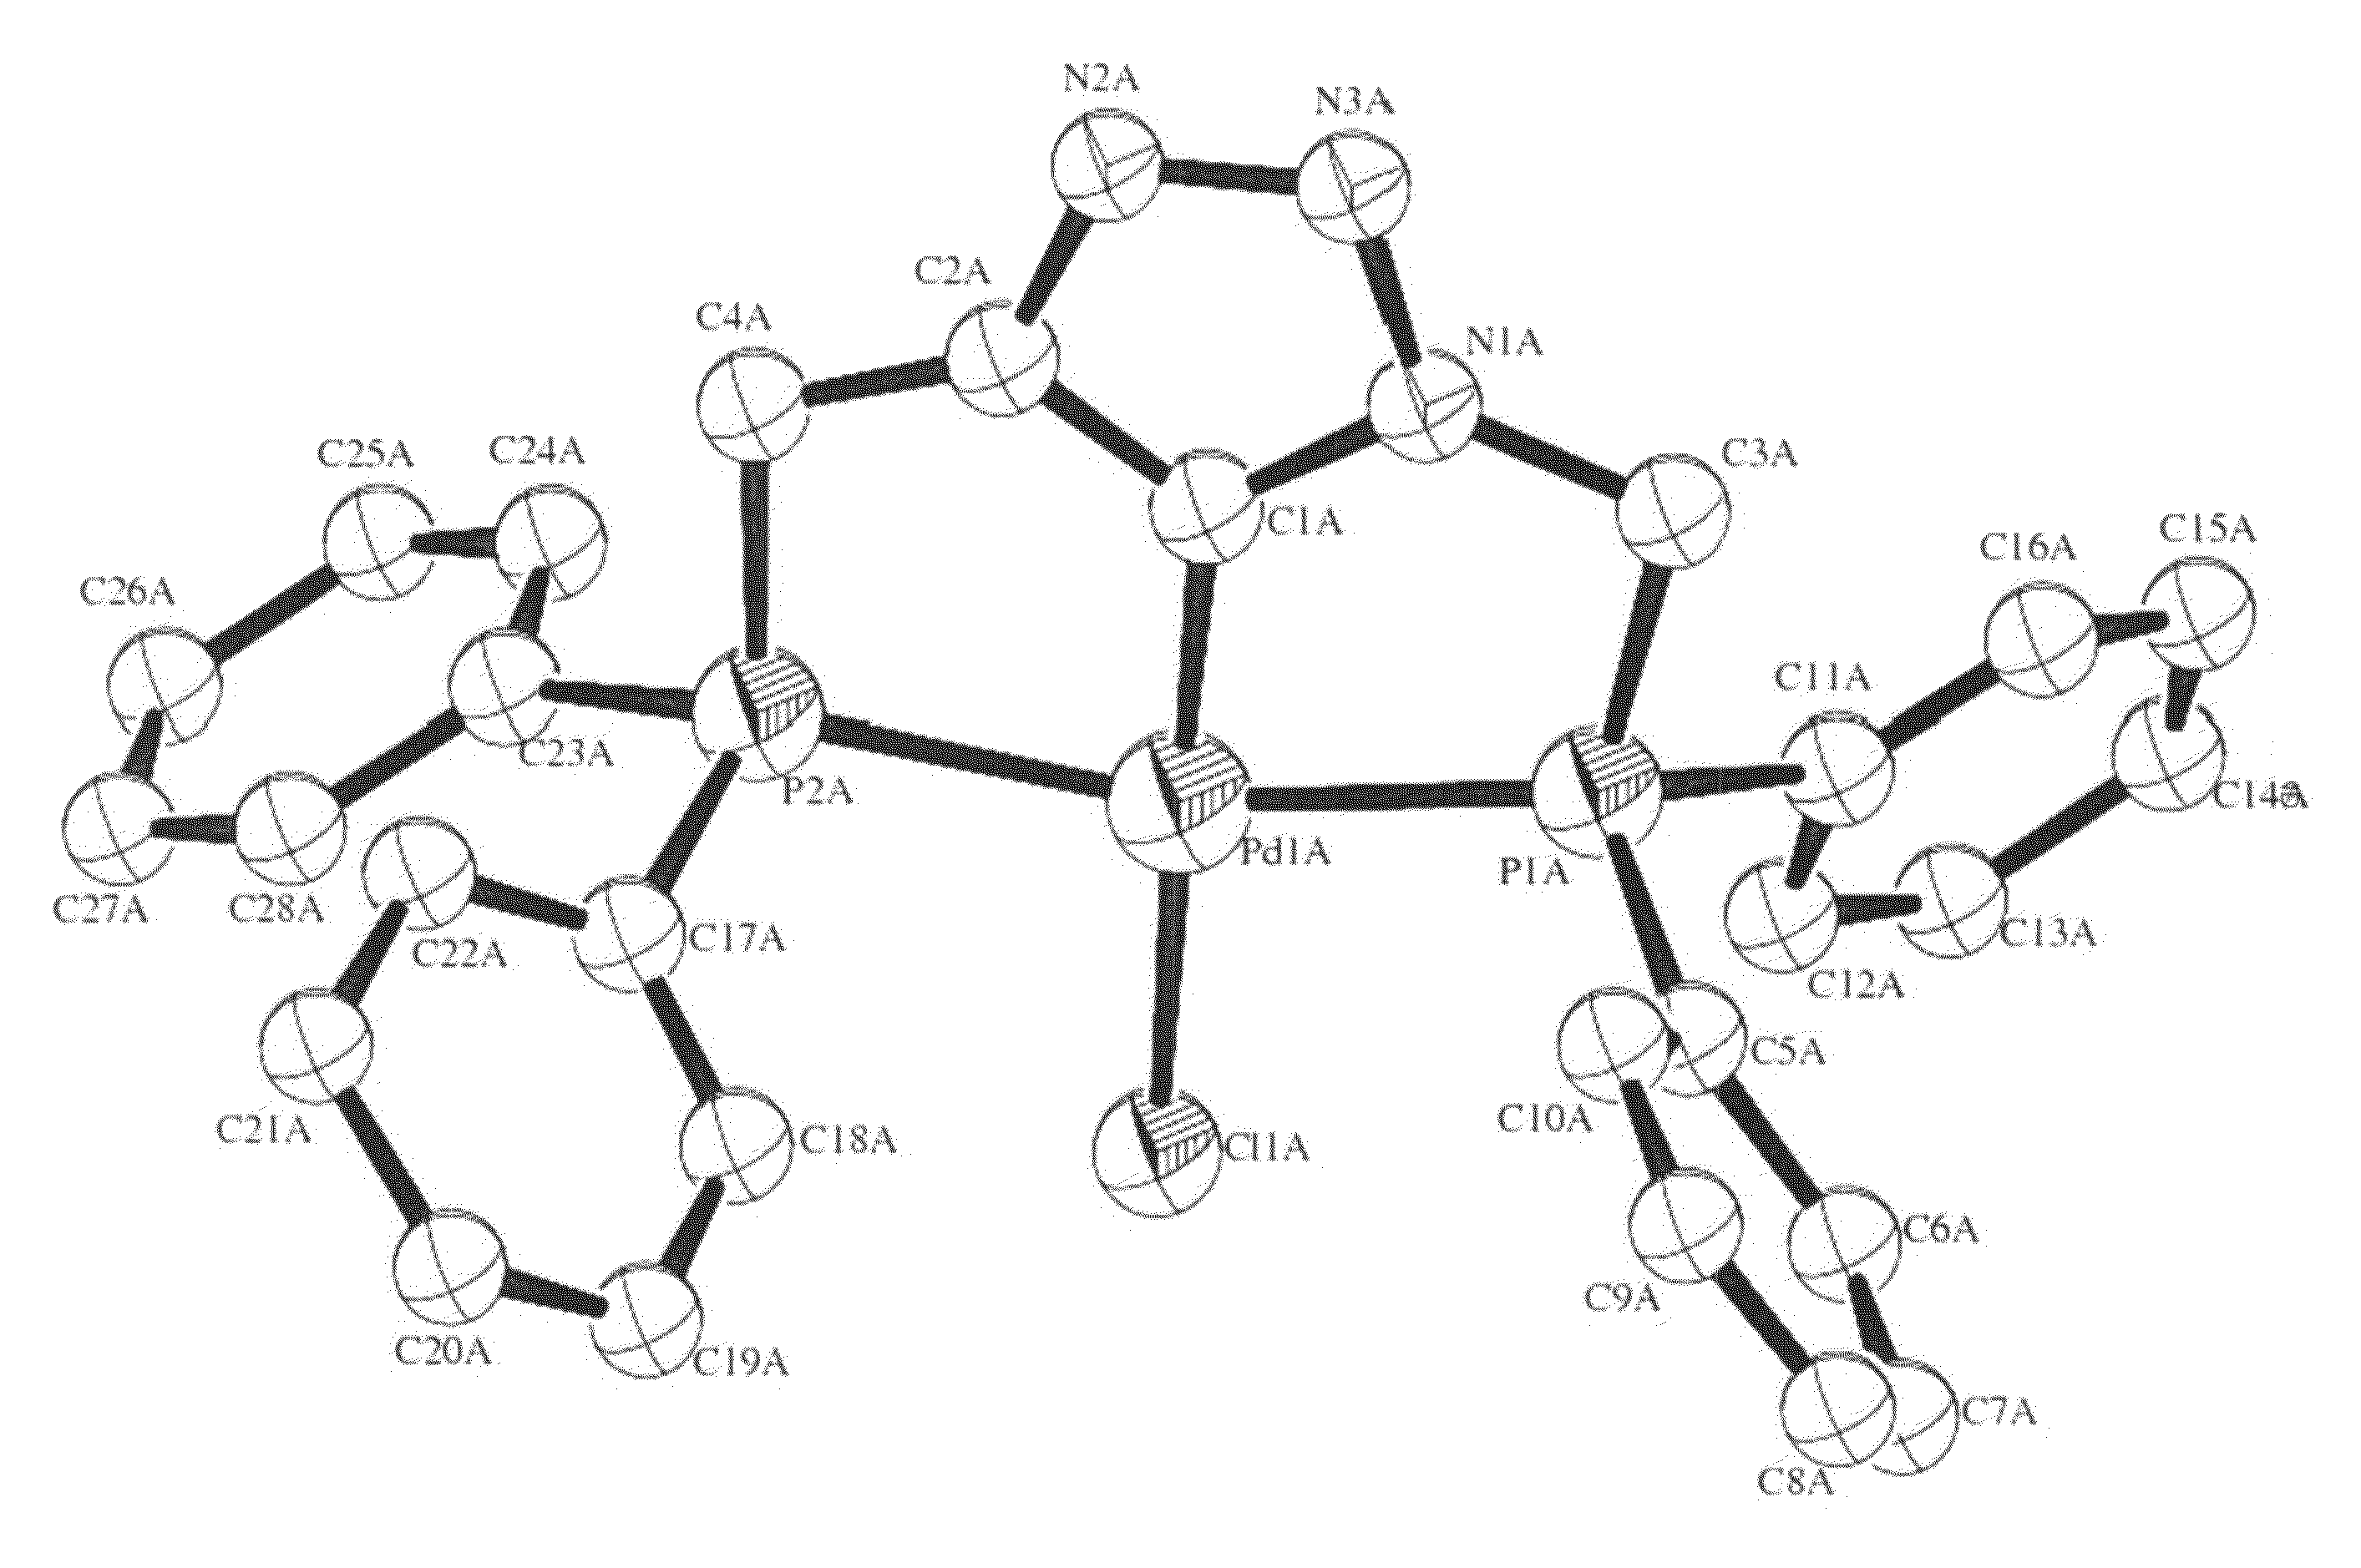 Novel diarylphosphine-containing compounds, processes of preparing same and uses thereof as tridentate ligands